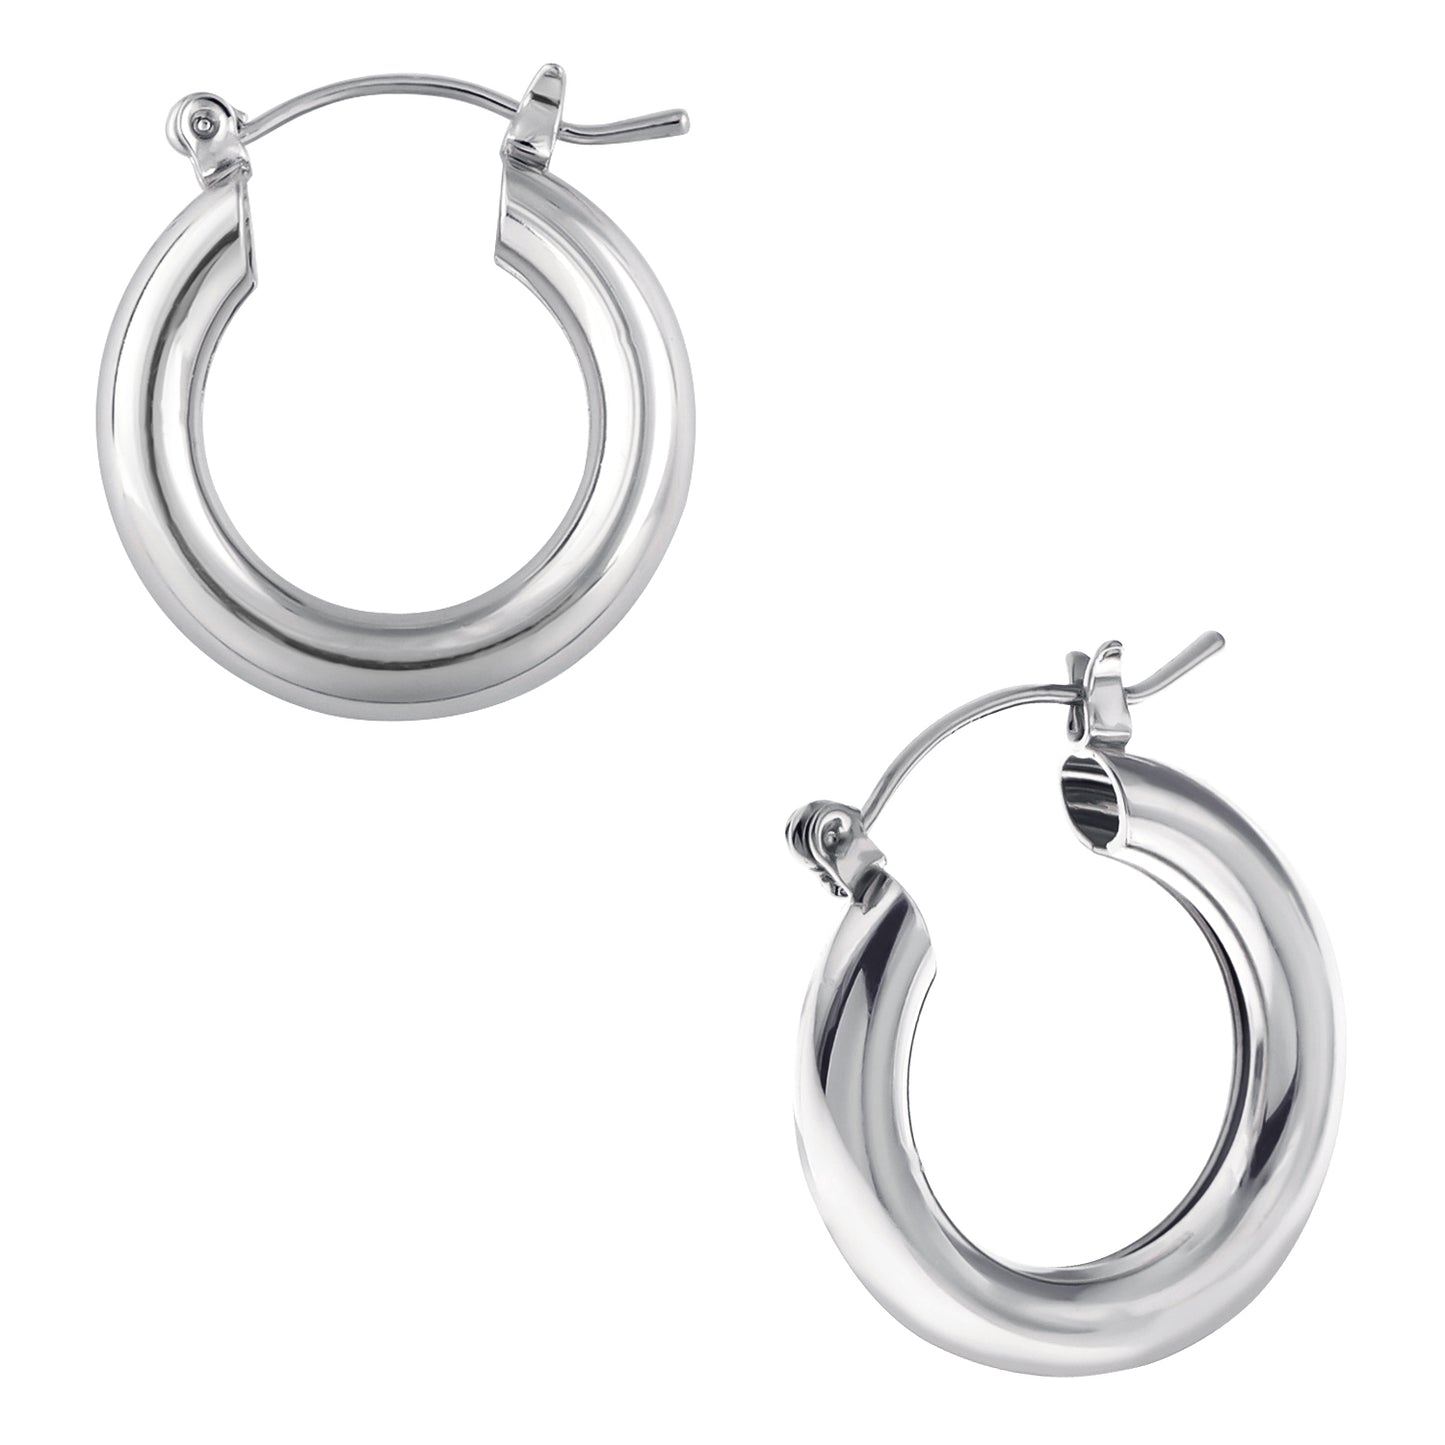 Alilang 14K Gold Plated Round Hoop Earrings for Womens Girls, Chunky Thick Huggie Earrings with 925 Sterling Silver Post for Sensitive Ears